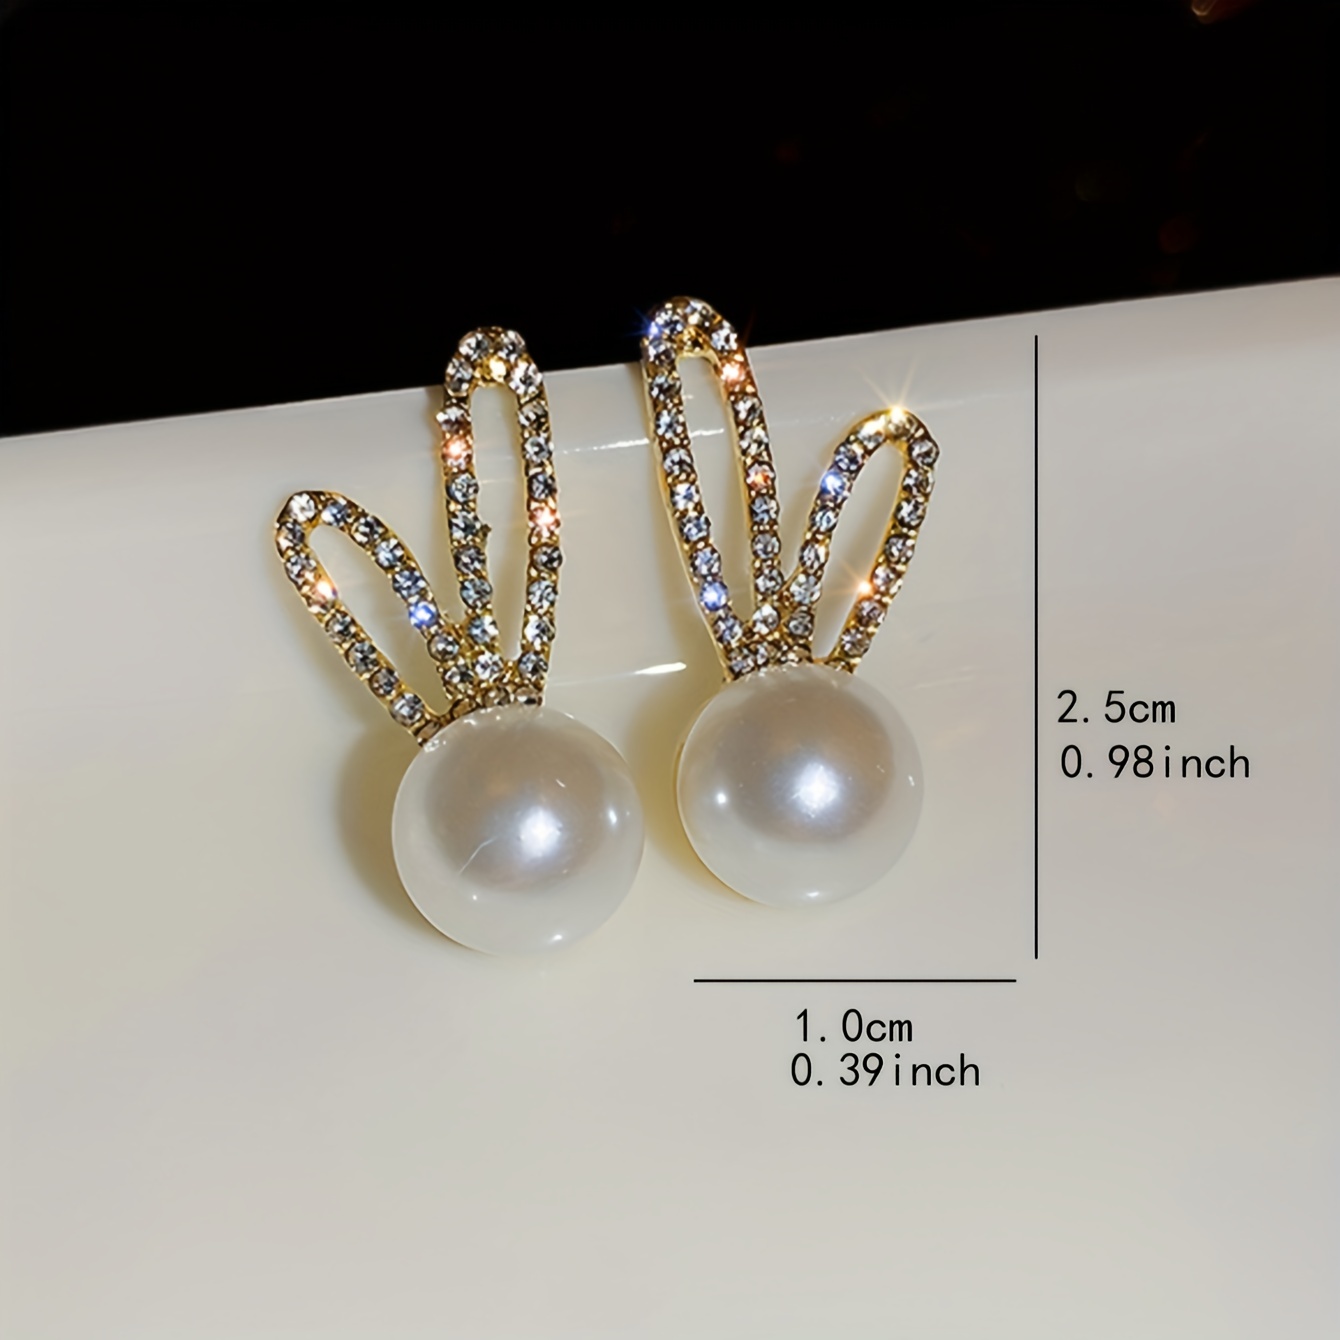 adorable rabbit design stud earrings alloy jewelry embellished with imitation pearl cute elegant style for women party ear decor details 3